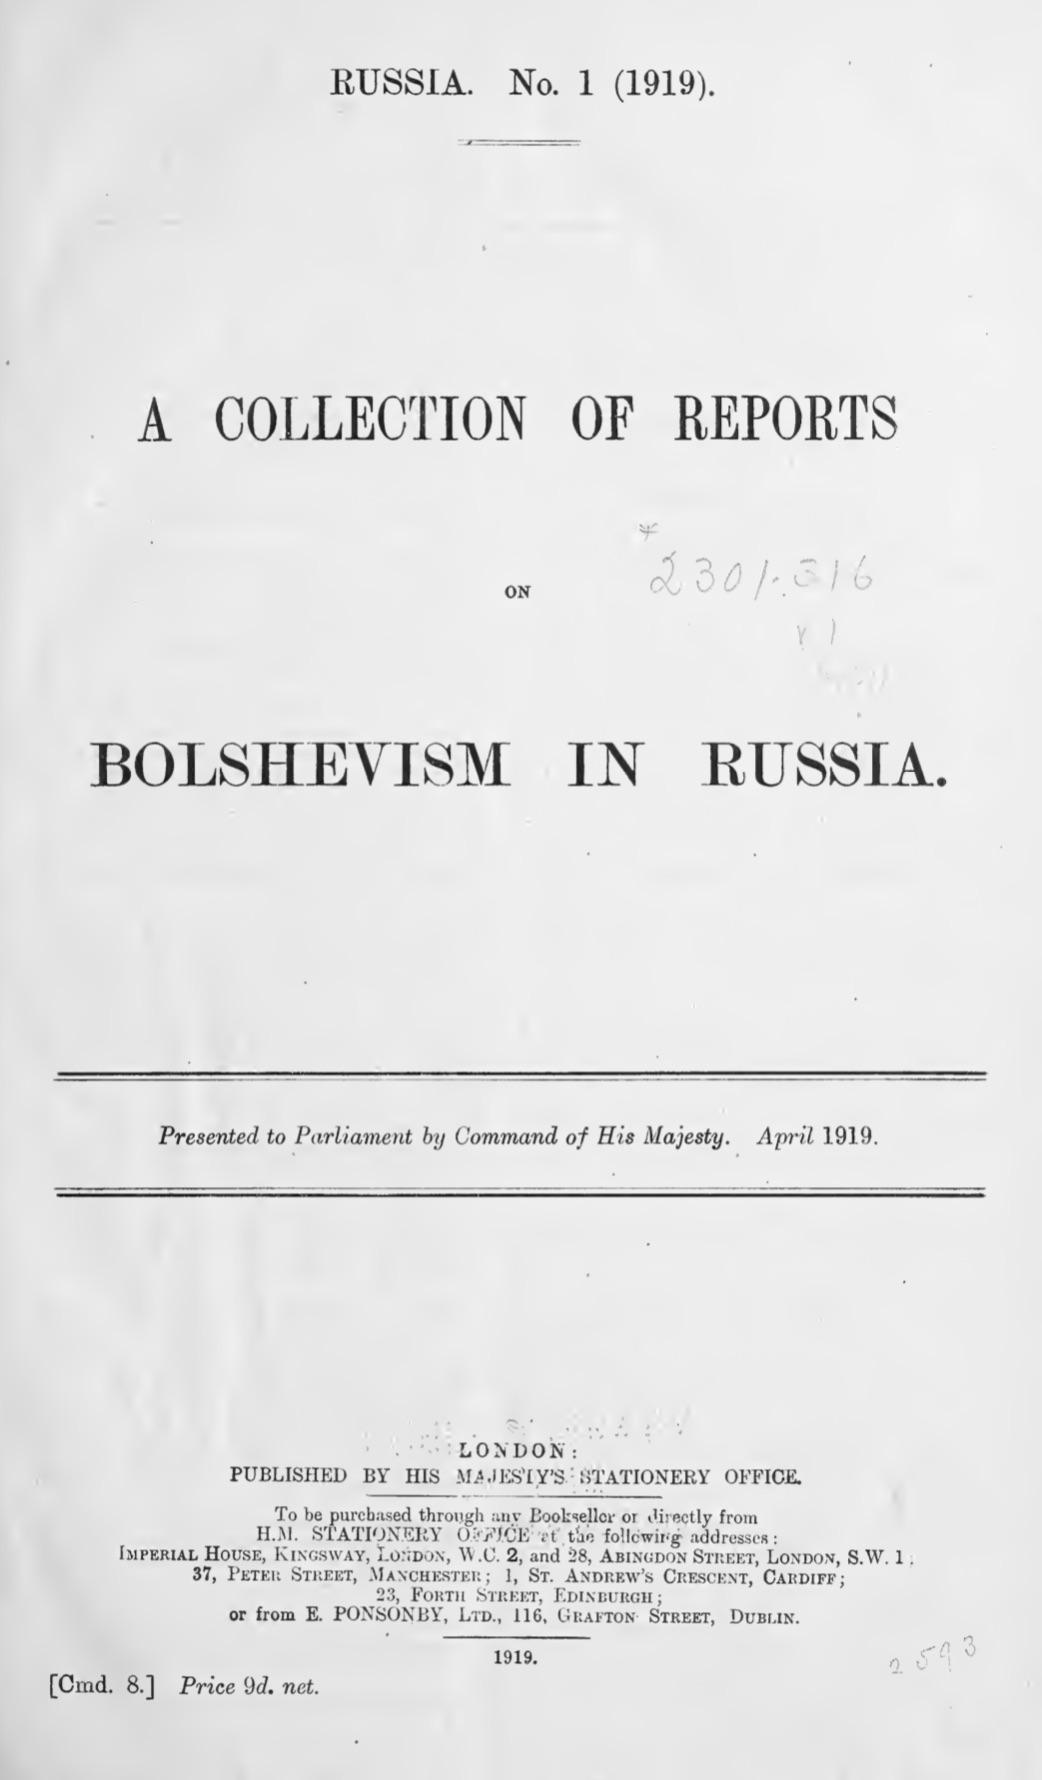 A collection of reports on Bolshevism in Russia (1919) by Foreign Office, Great Britain